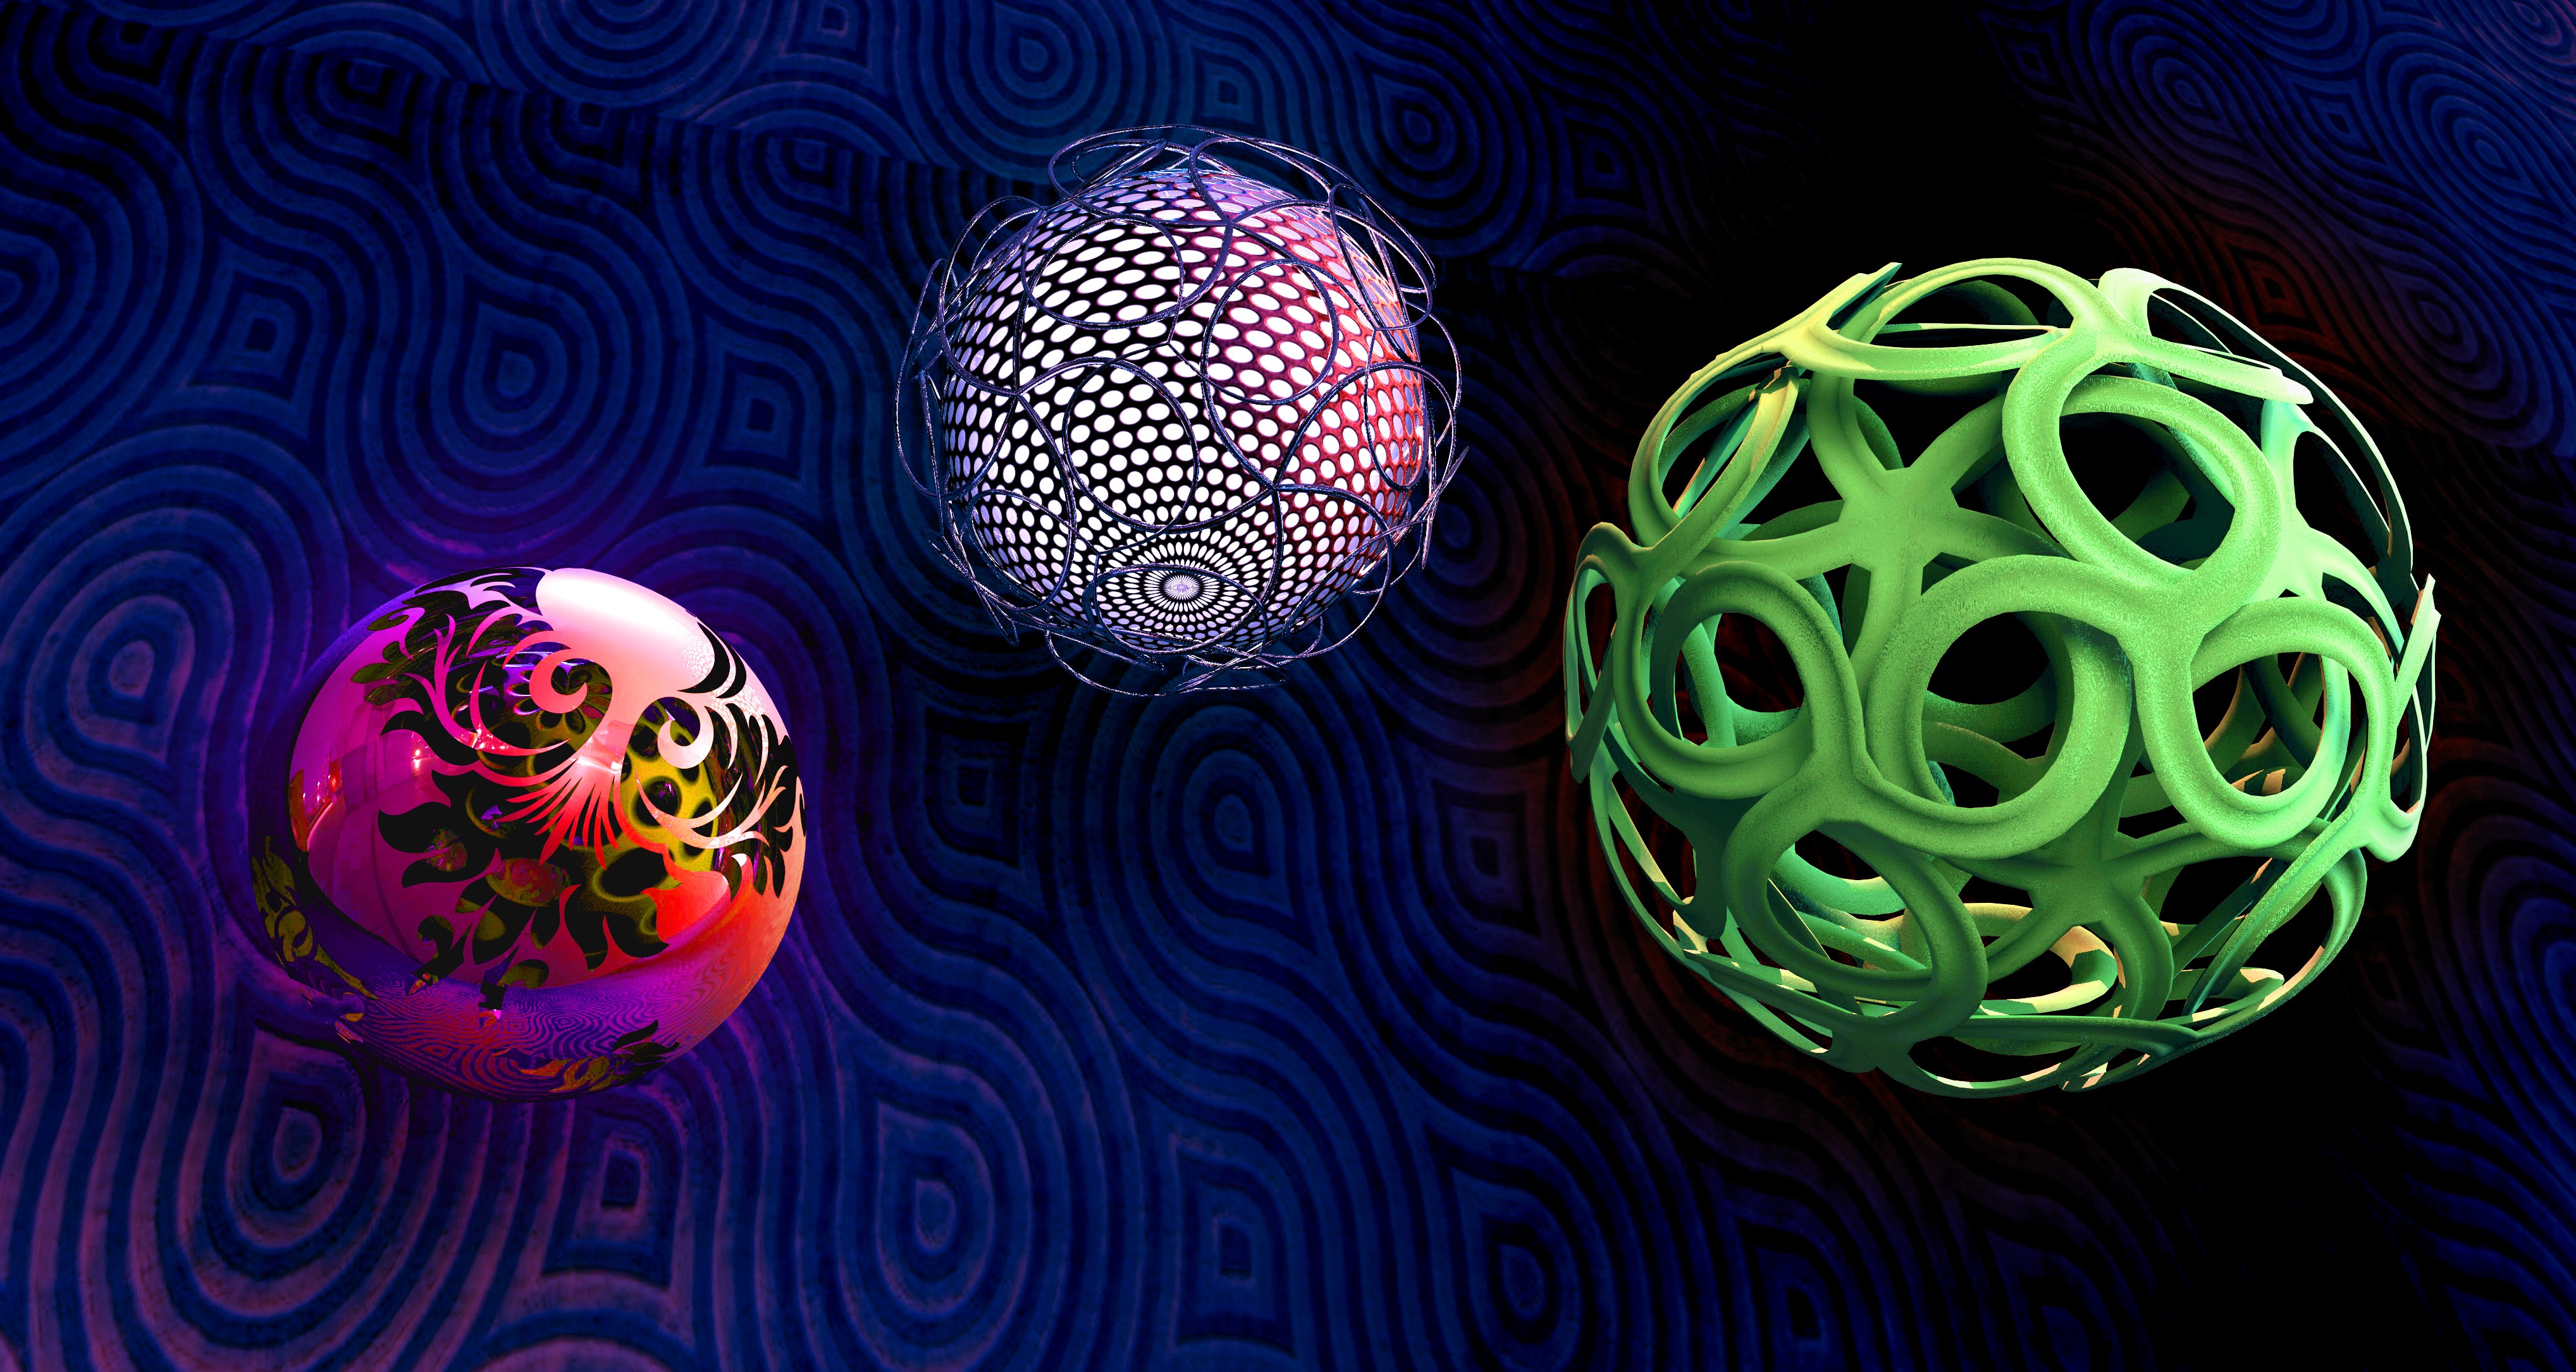 Images Of Spheres Shapes - IMAGESEE